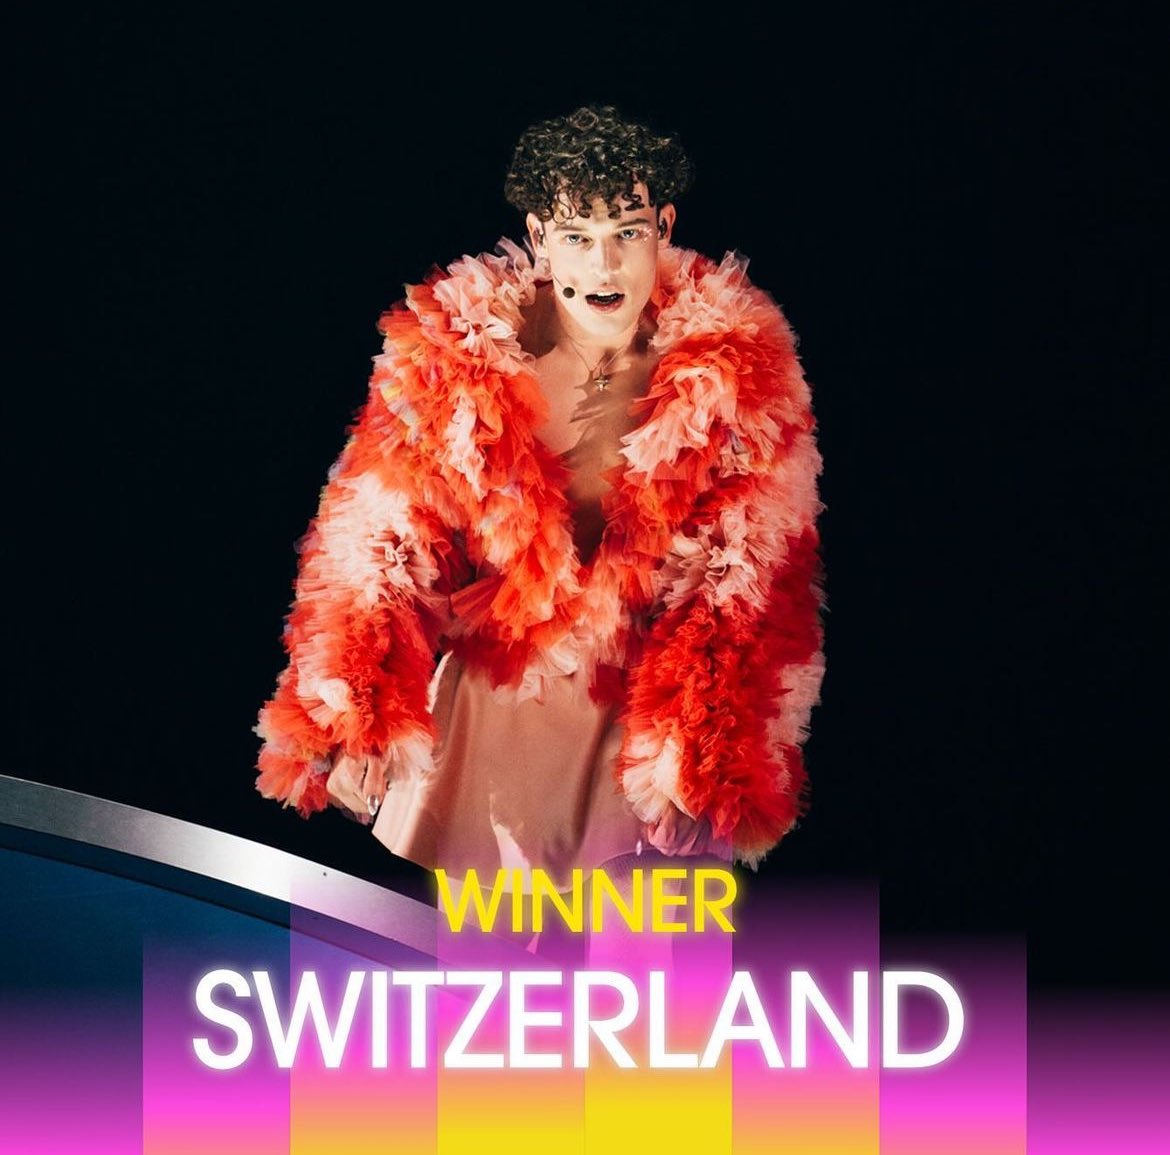 Congratulations and all the love from us to this year’s brilliant Eurovision winner NEMO from Switzerland! What an artist, what a performance, what a voice! We cheered for you Nemo, you are amazing! #lordofthelost #eurovision #nemo